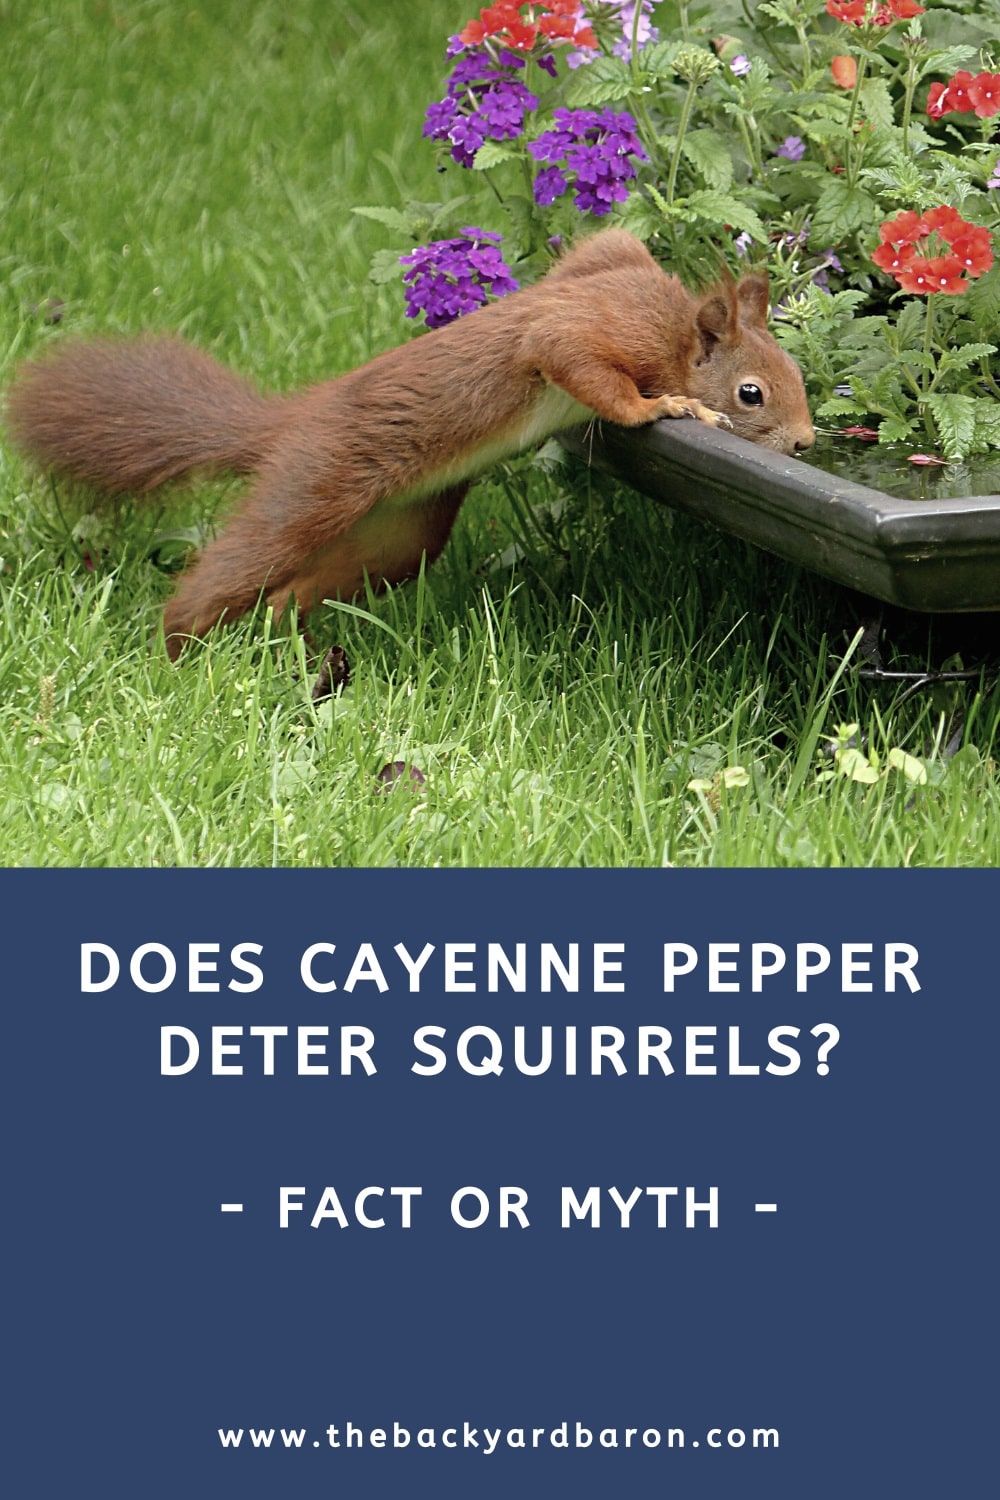 Does cayenne pepper deter squirrels?